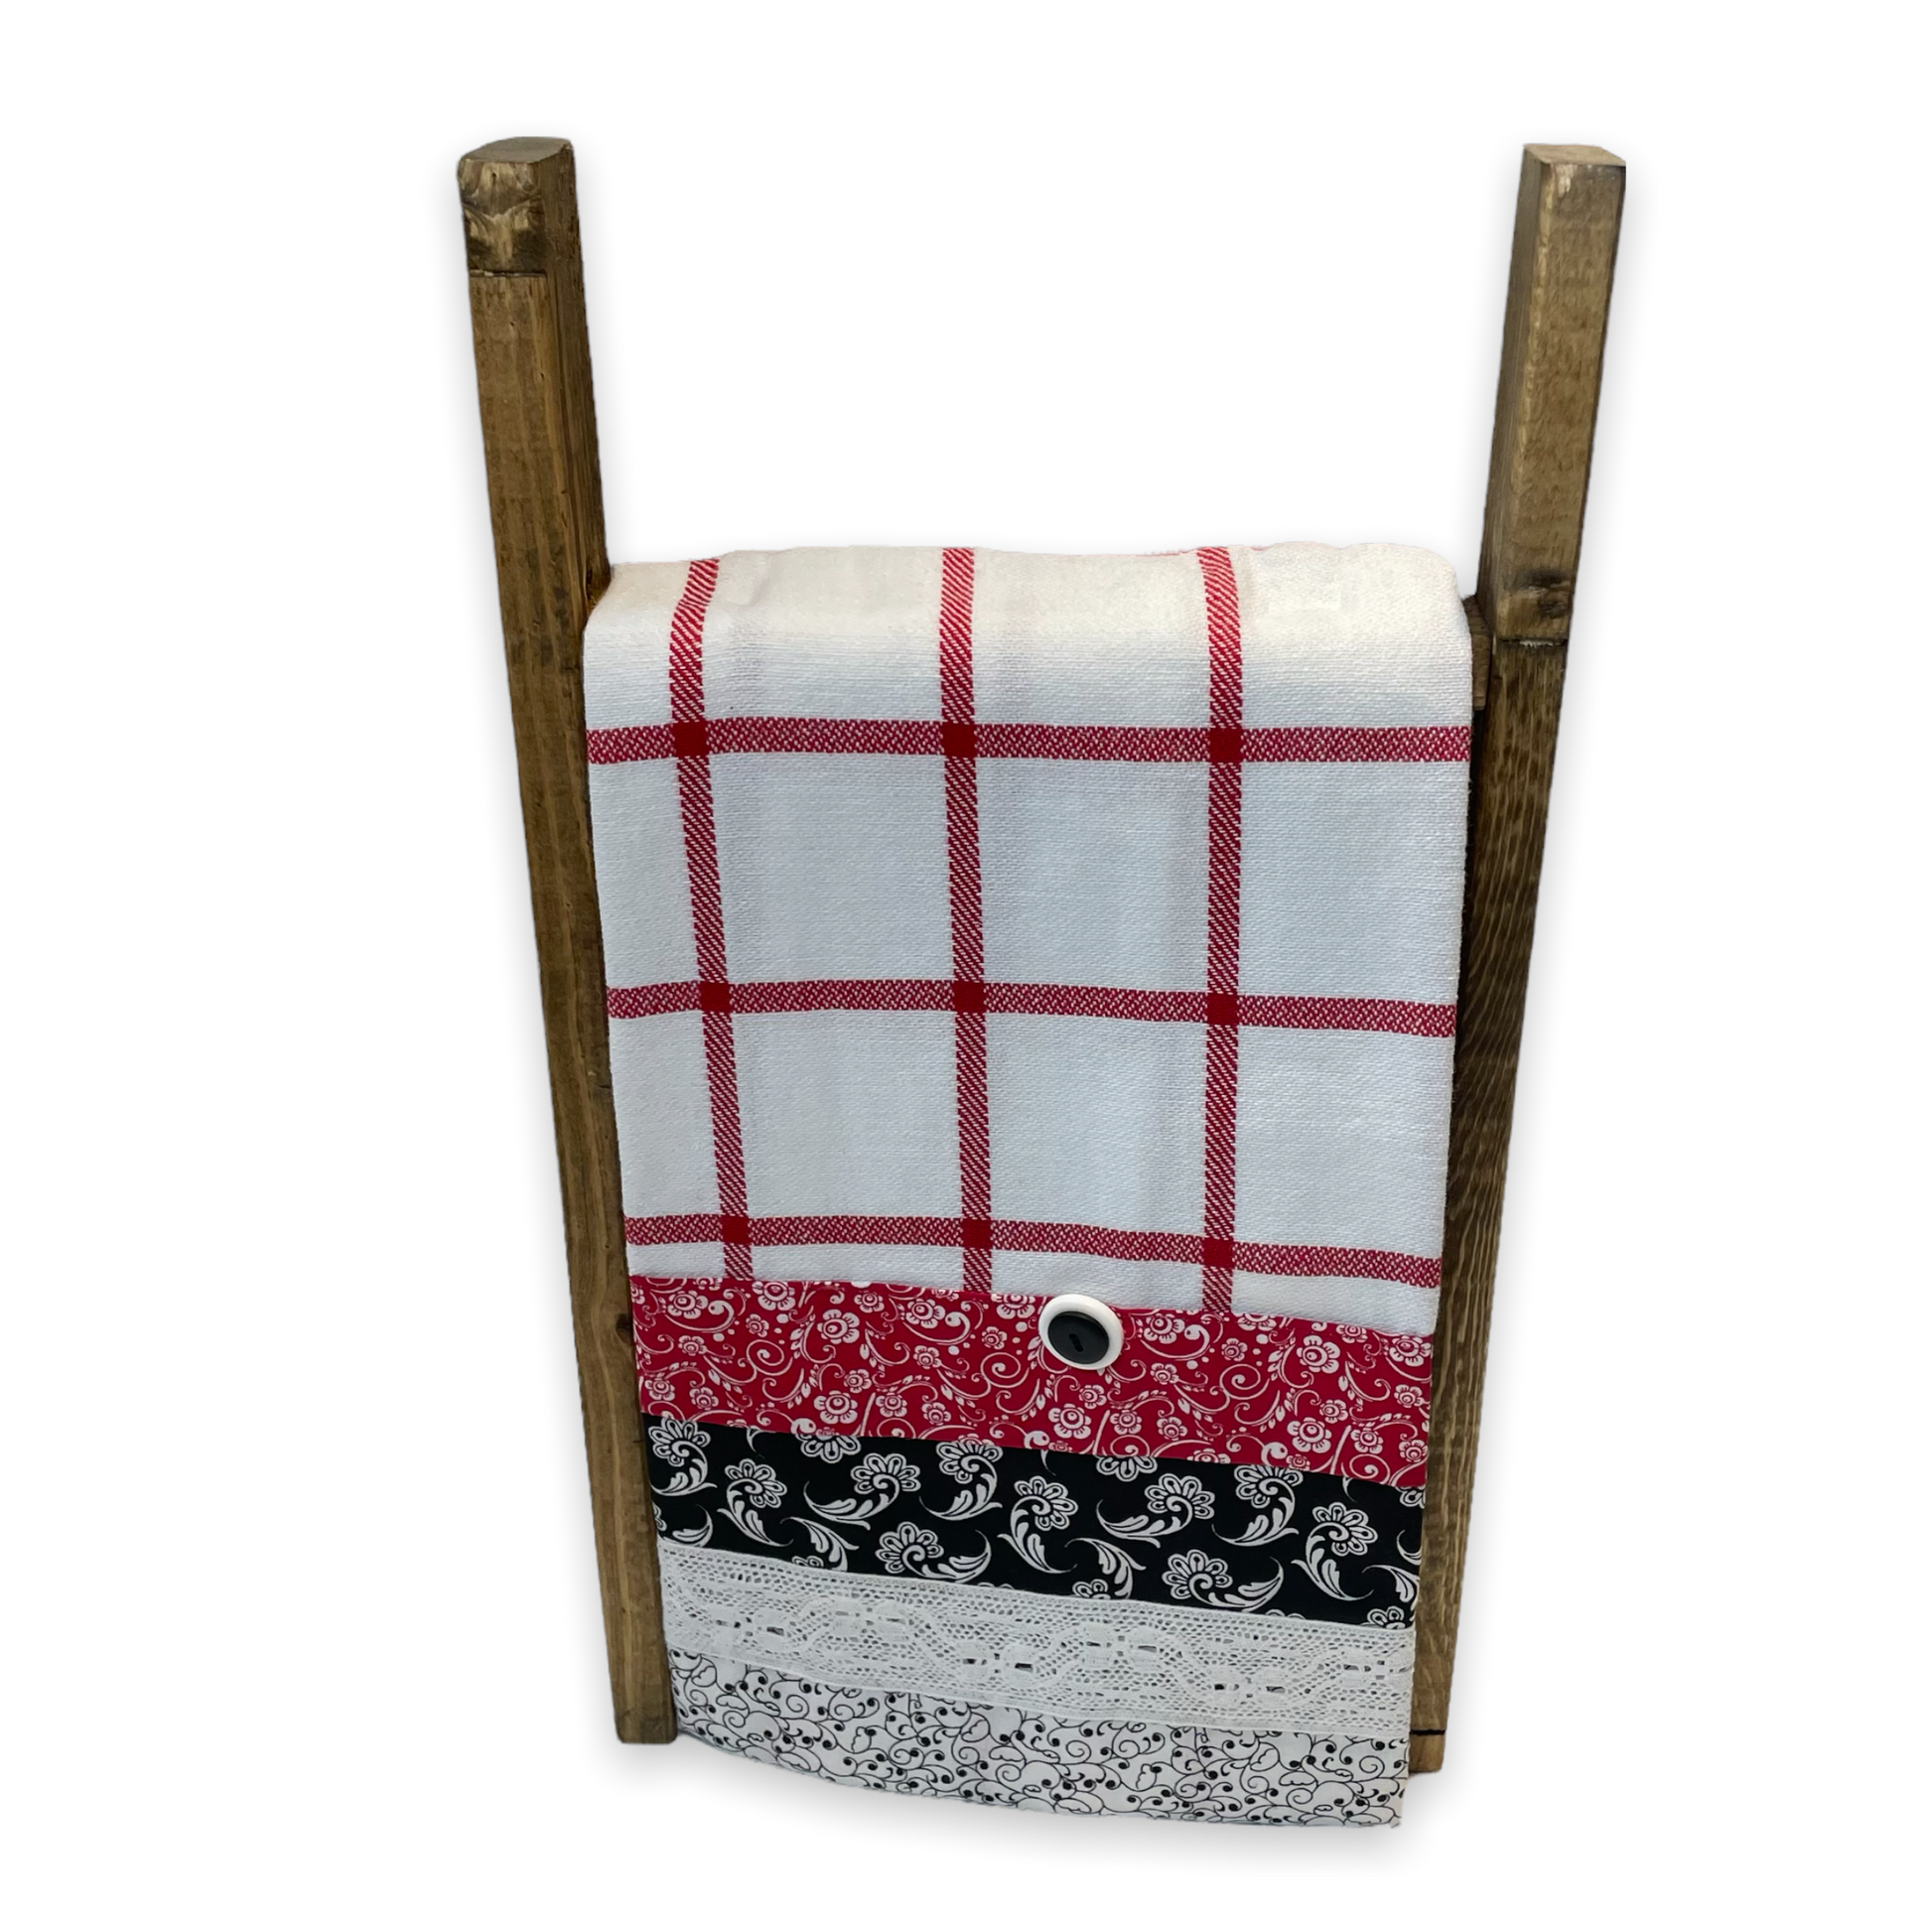 Red and white country style dish towel. Featuring red and white checked toweling; red white and black quilt cotton accents and white cotton lace trim and a double button embellishment.  Part of a mix and match collection of coordinated farmhouse fabulous decor. Browse the collections and be sure to check out the Home Stitchery Decor YouTube Channel.